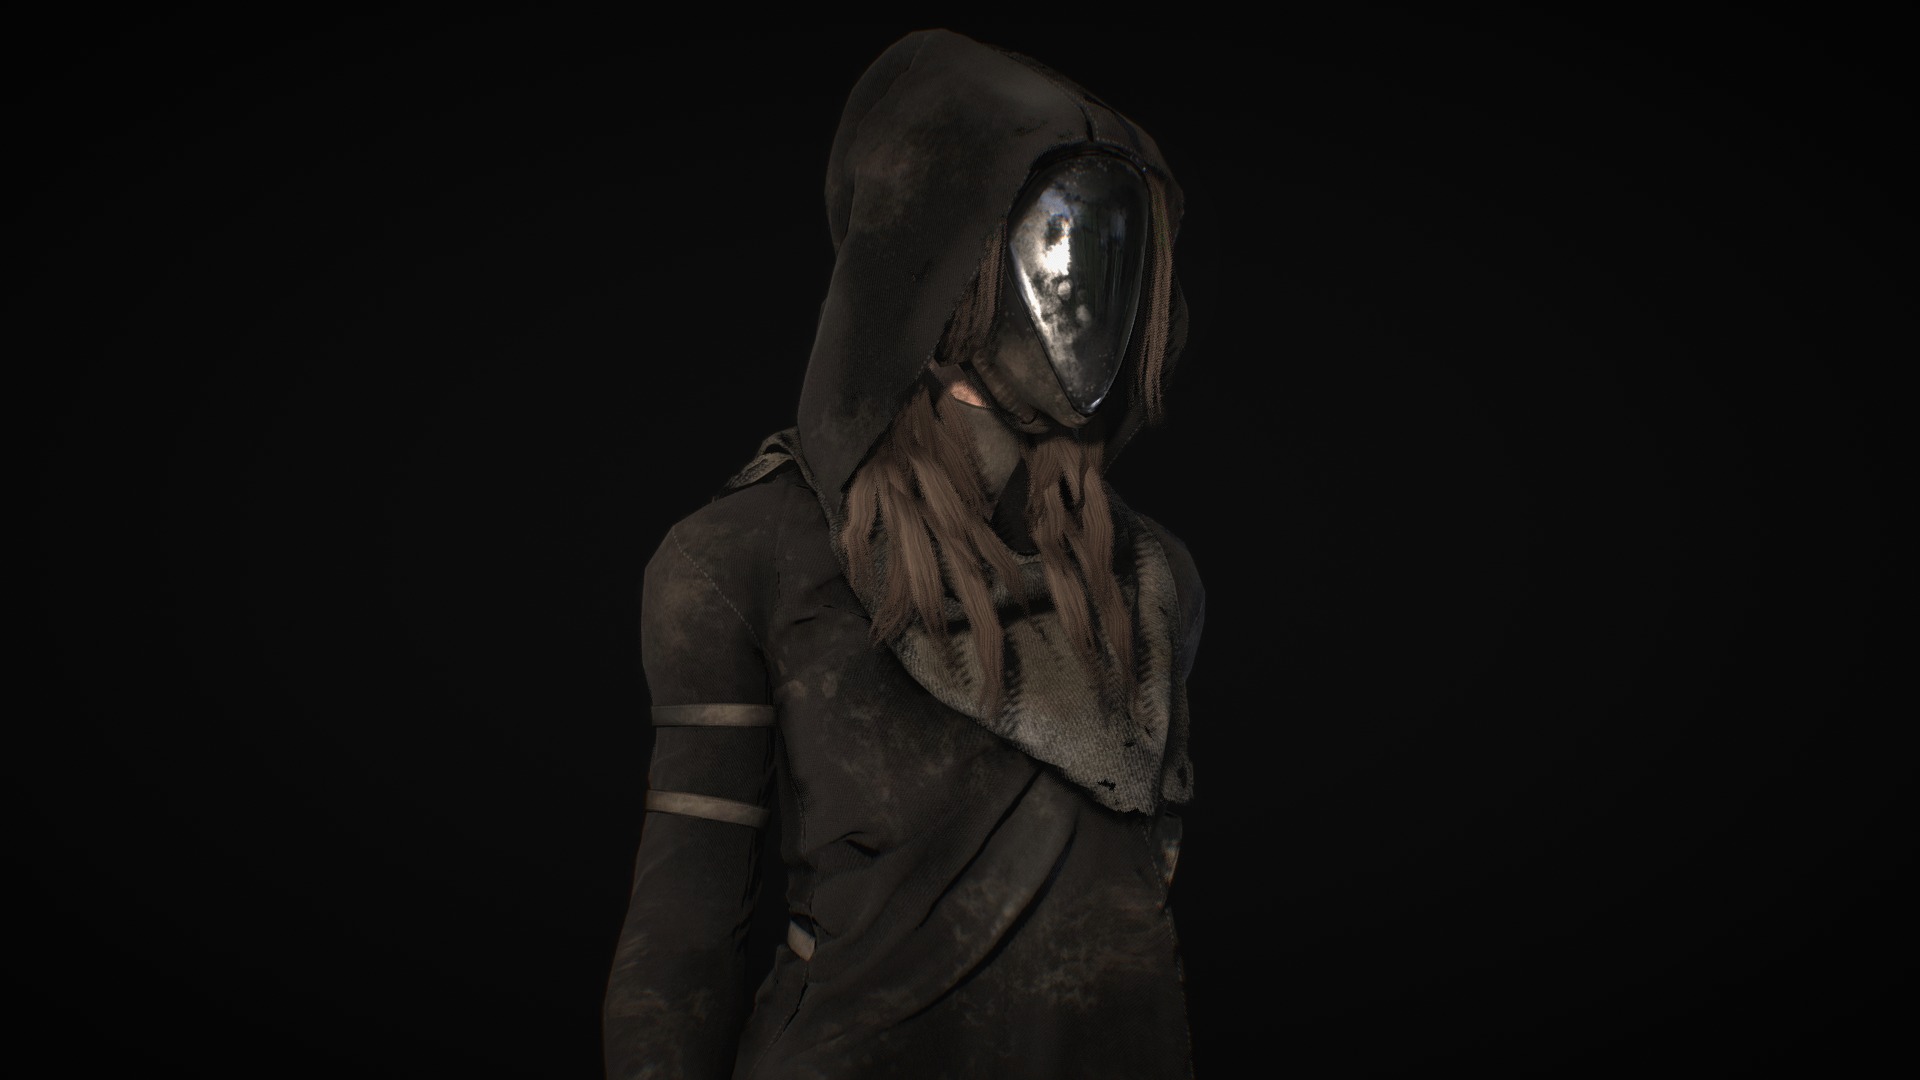 ORIGINAL POST:
Behance
https://www.behance.net/gallery/49652469/E-A-T-E-N-Character-Concept
Artstation
https://www.artstation.com/artwork/qKAlz

EATEN is a personal free-time project, the idea was try to create a modern plague doctor character, I've based the concept from street goth female fashion, Bloodborne's characters and film like &ldquo;The Road